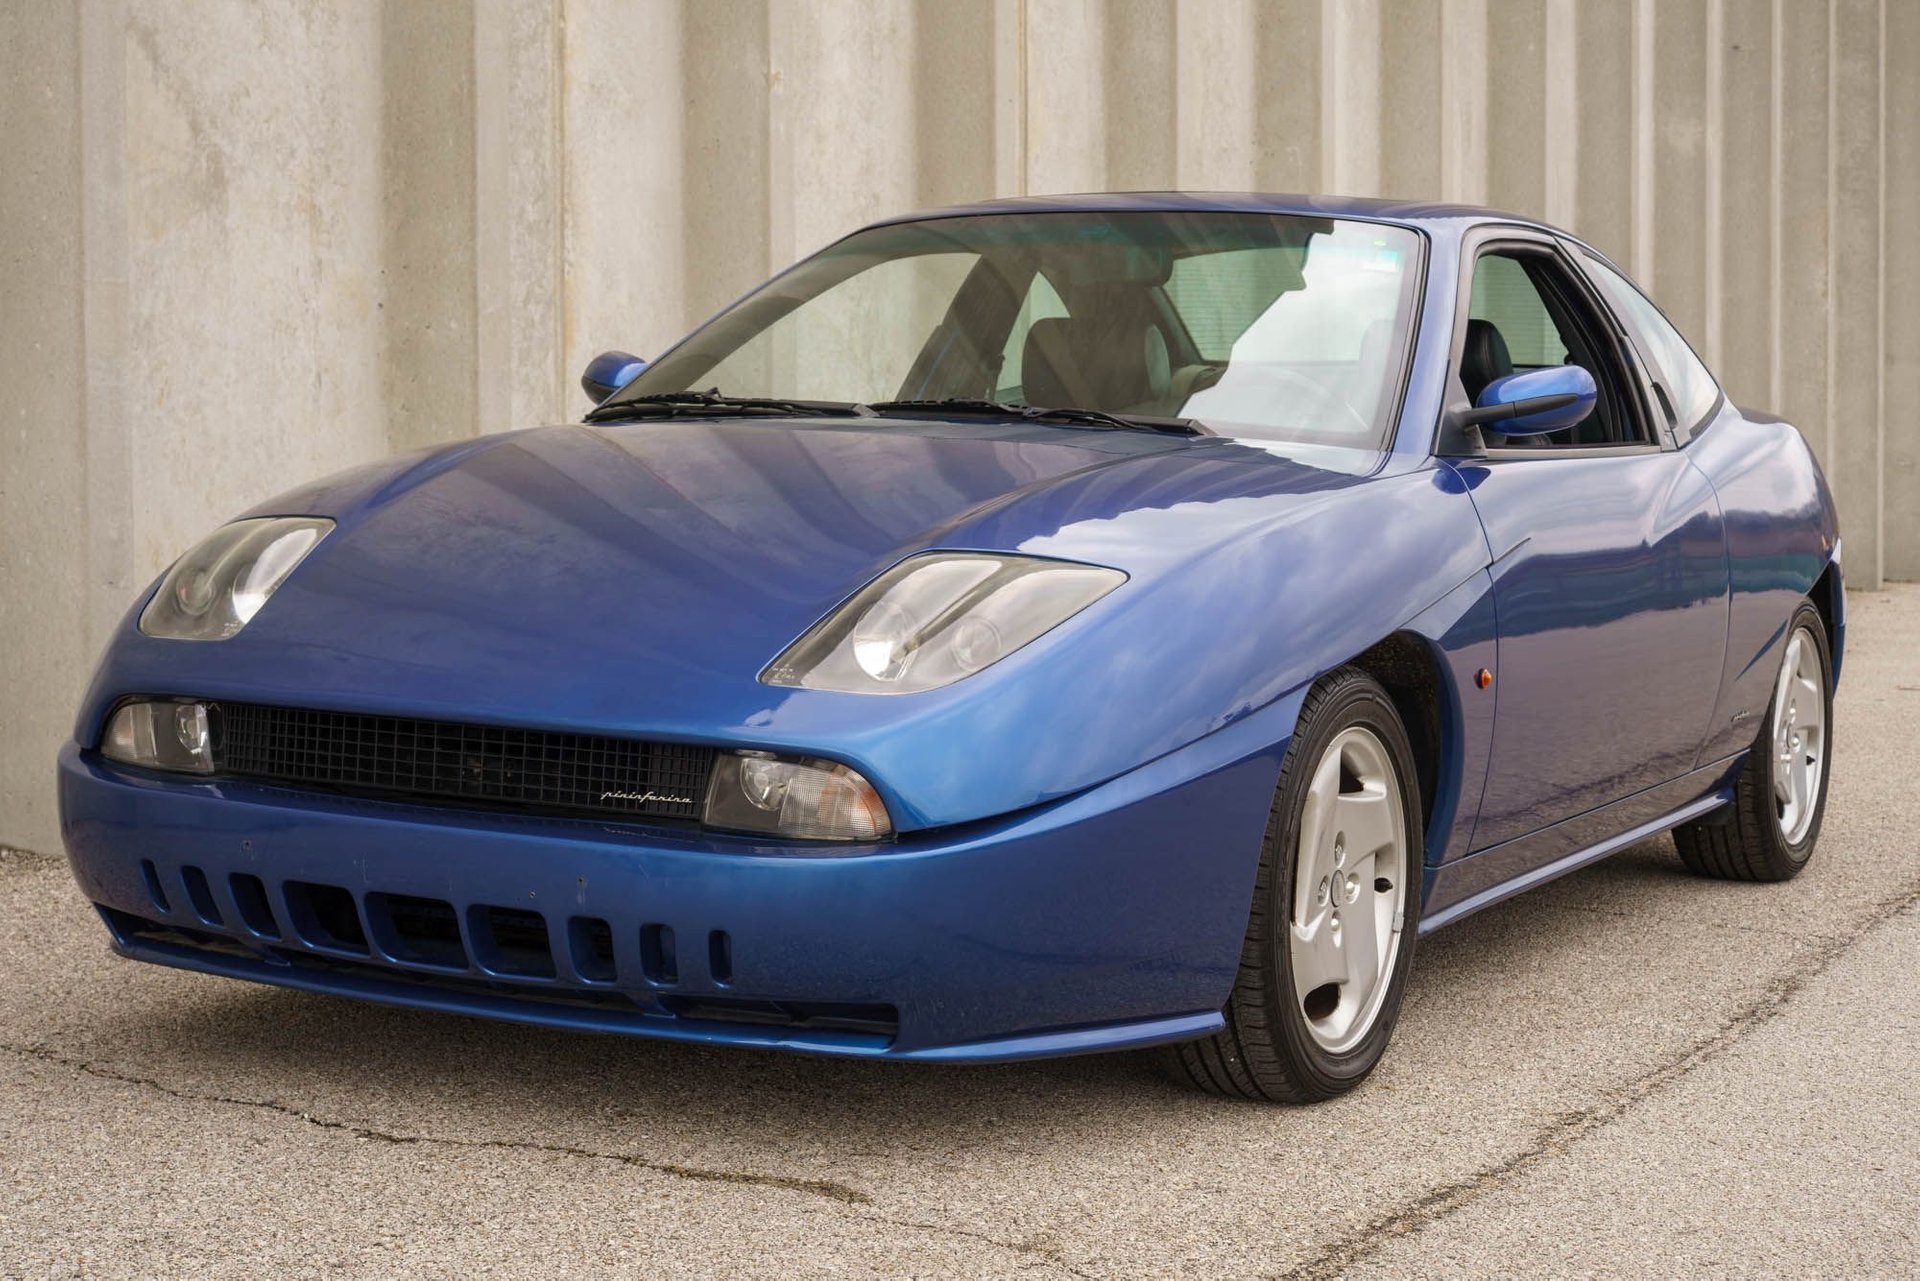 1994 fiat coup 1994 fiat coupe